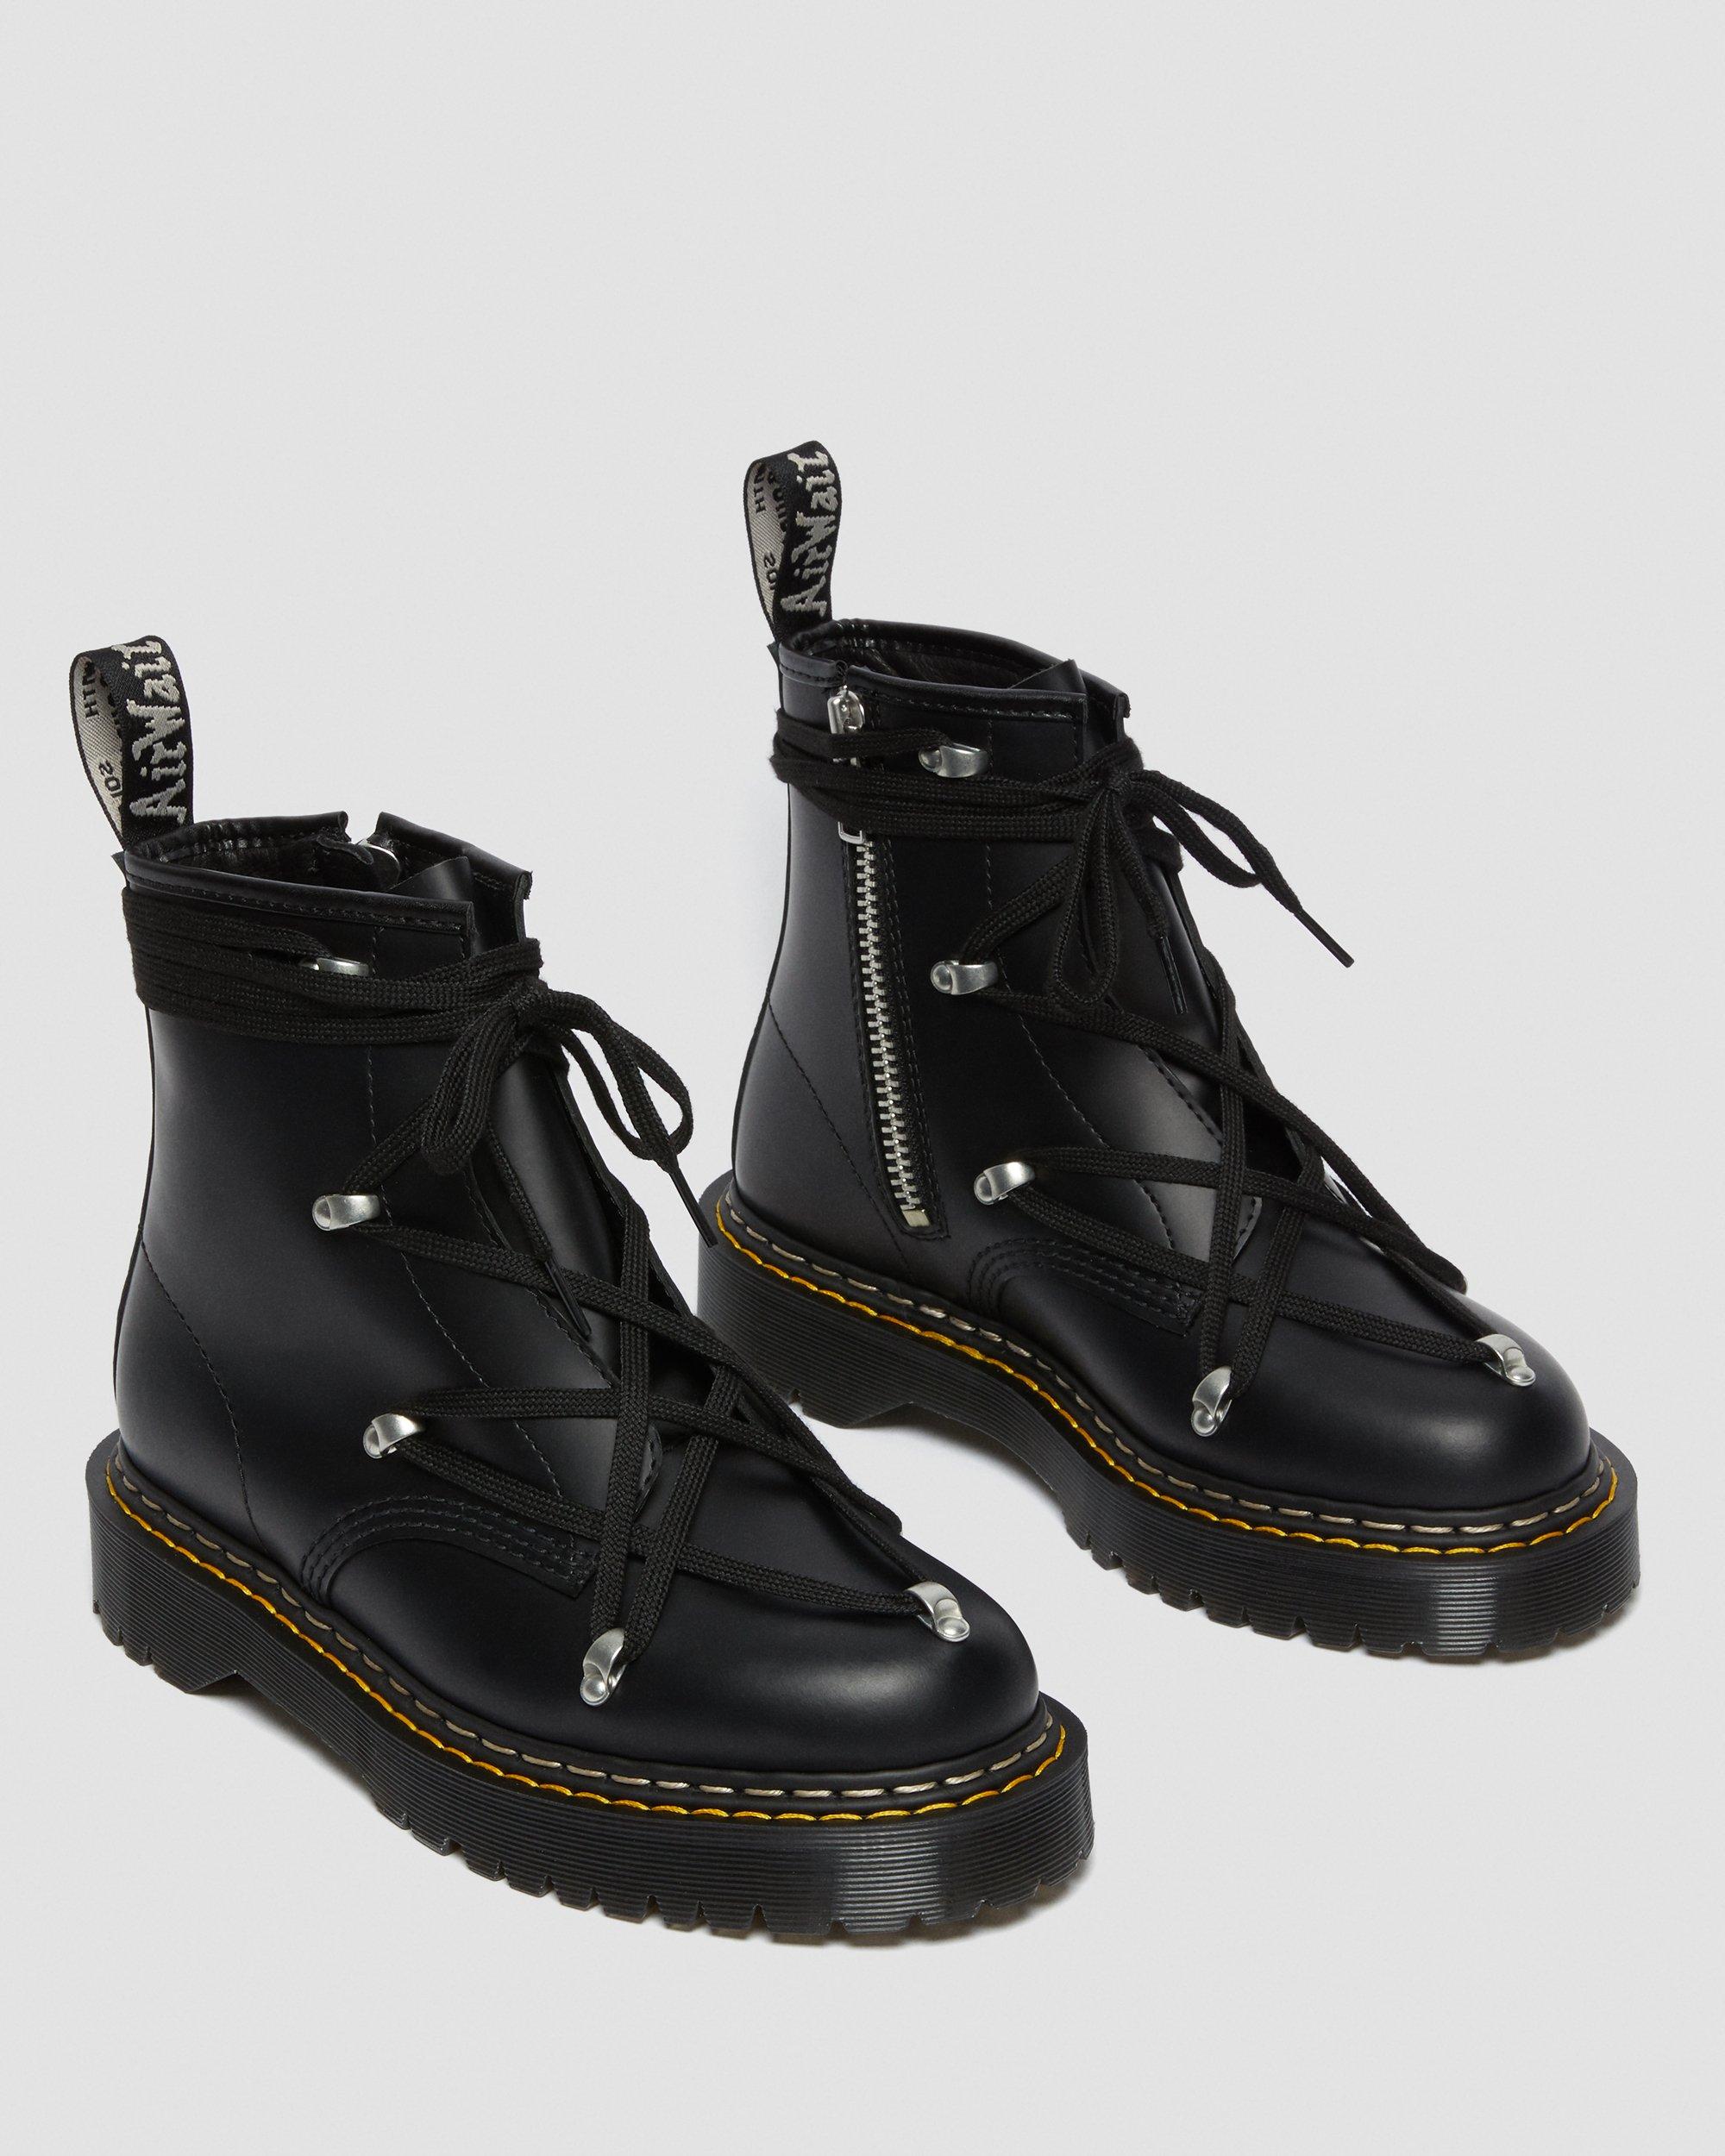 DR MARTENS 1460 Bex Rick Owens Laced Ankle Boots